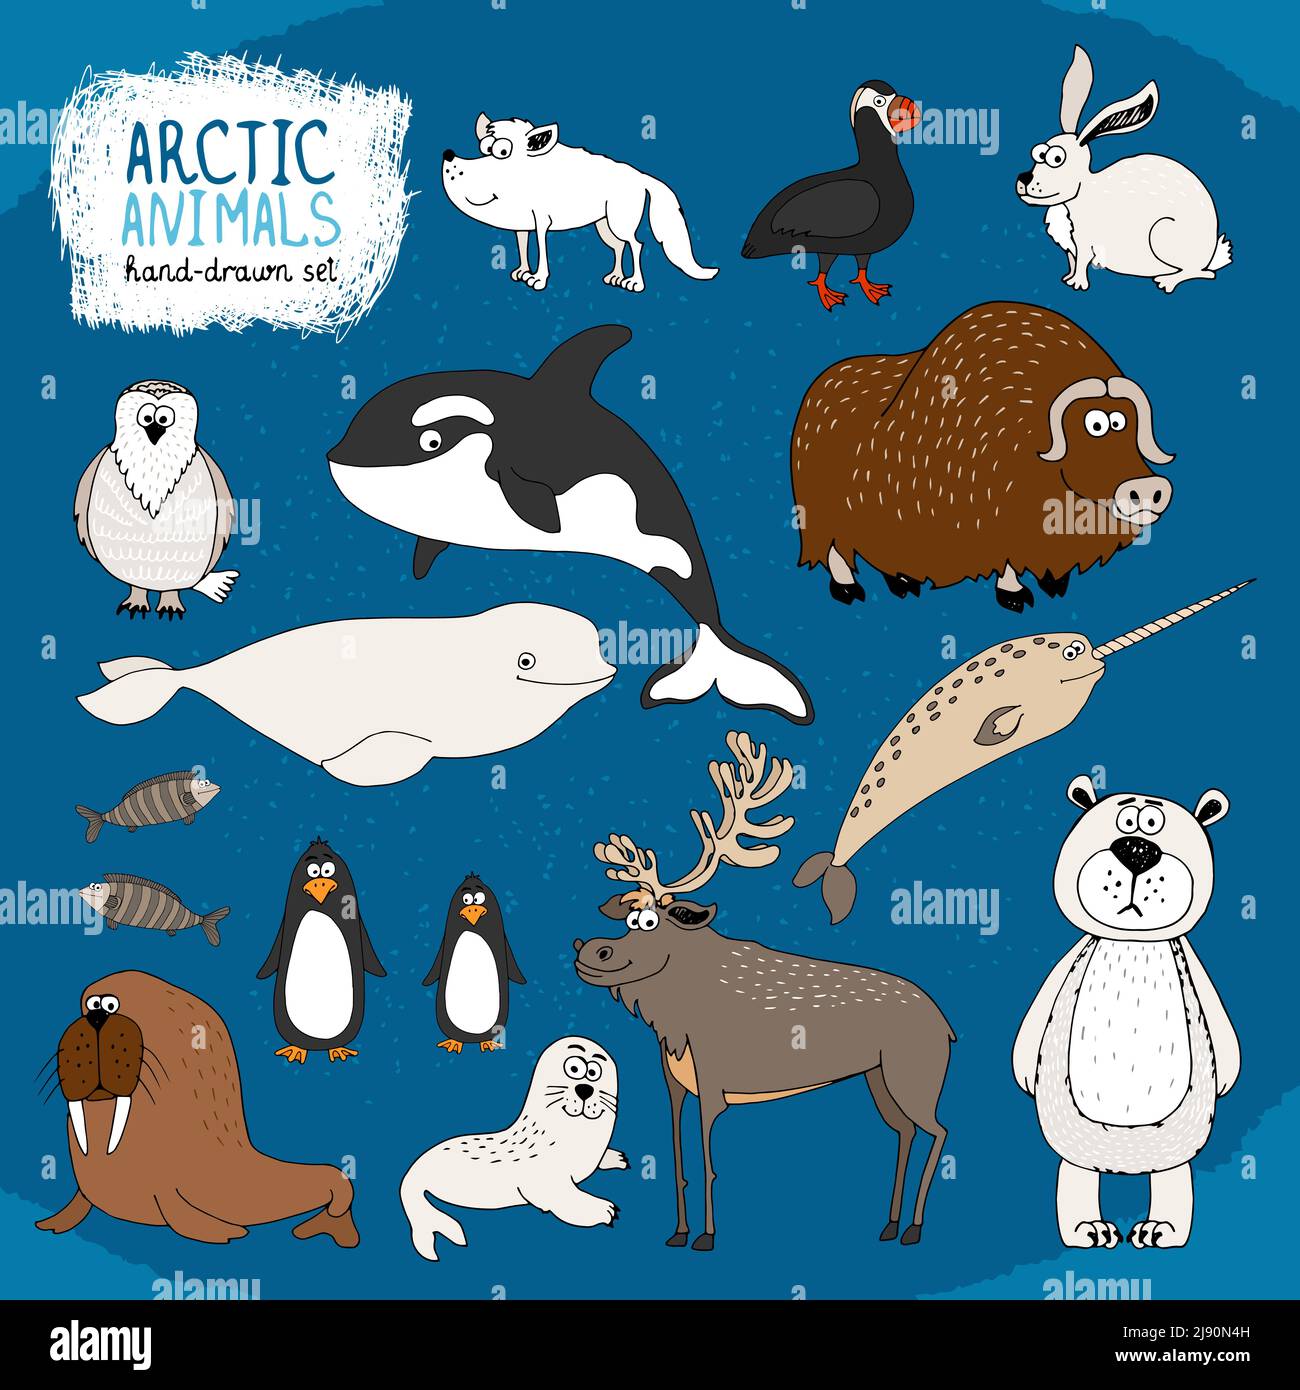 Set of hand-drawn arctic animals on a cold blue background with a polar bear  bison  reindeer  orca  beluga whale and narwhal  hare  fox  puffin  walr Stock Vector